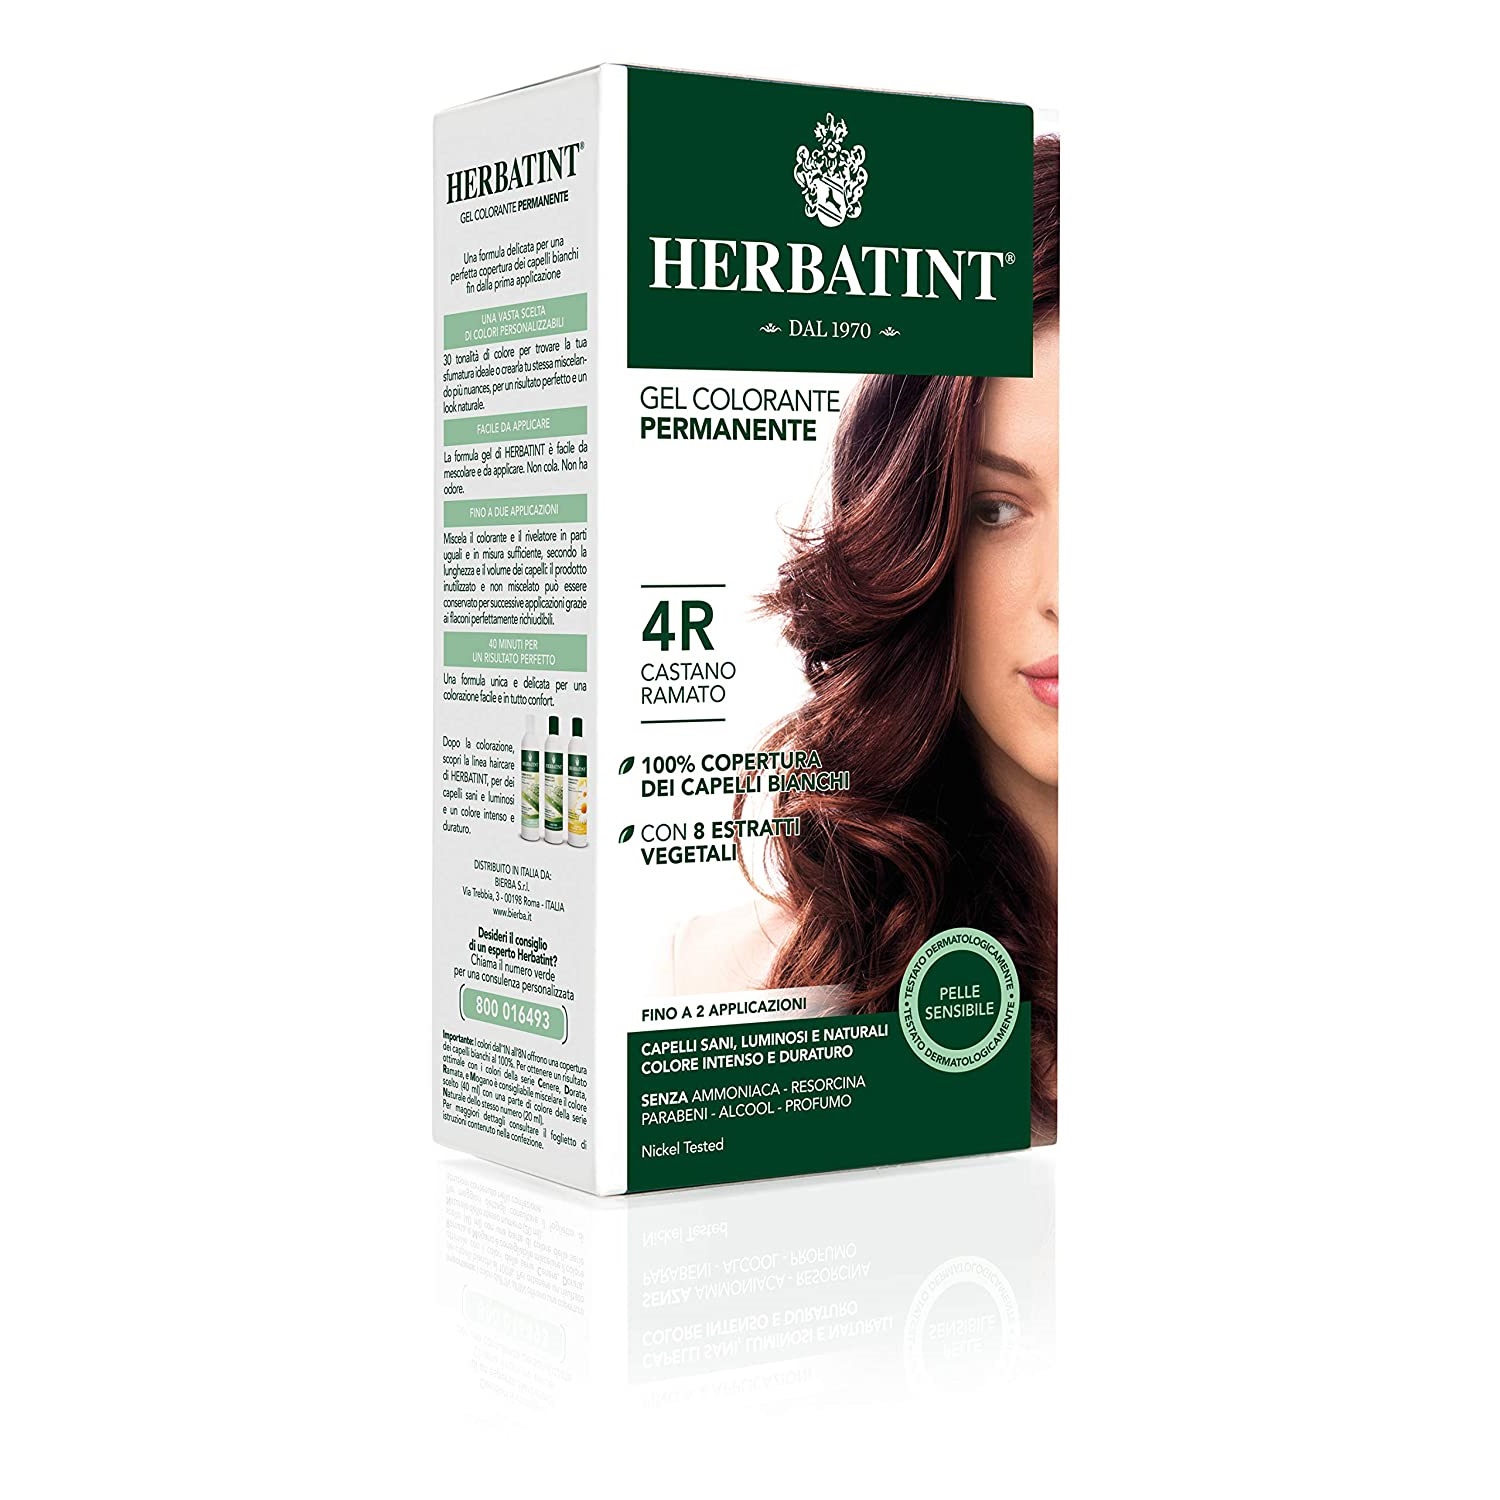 Herbatint Hair Colour - Down to Earth Healthfood Store